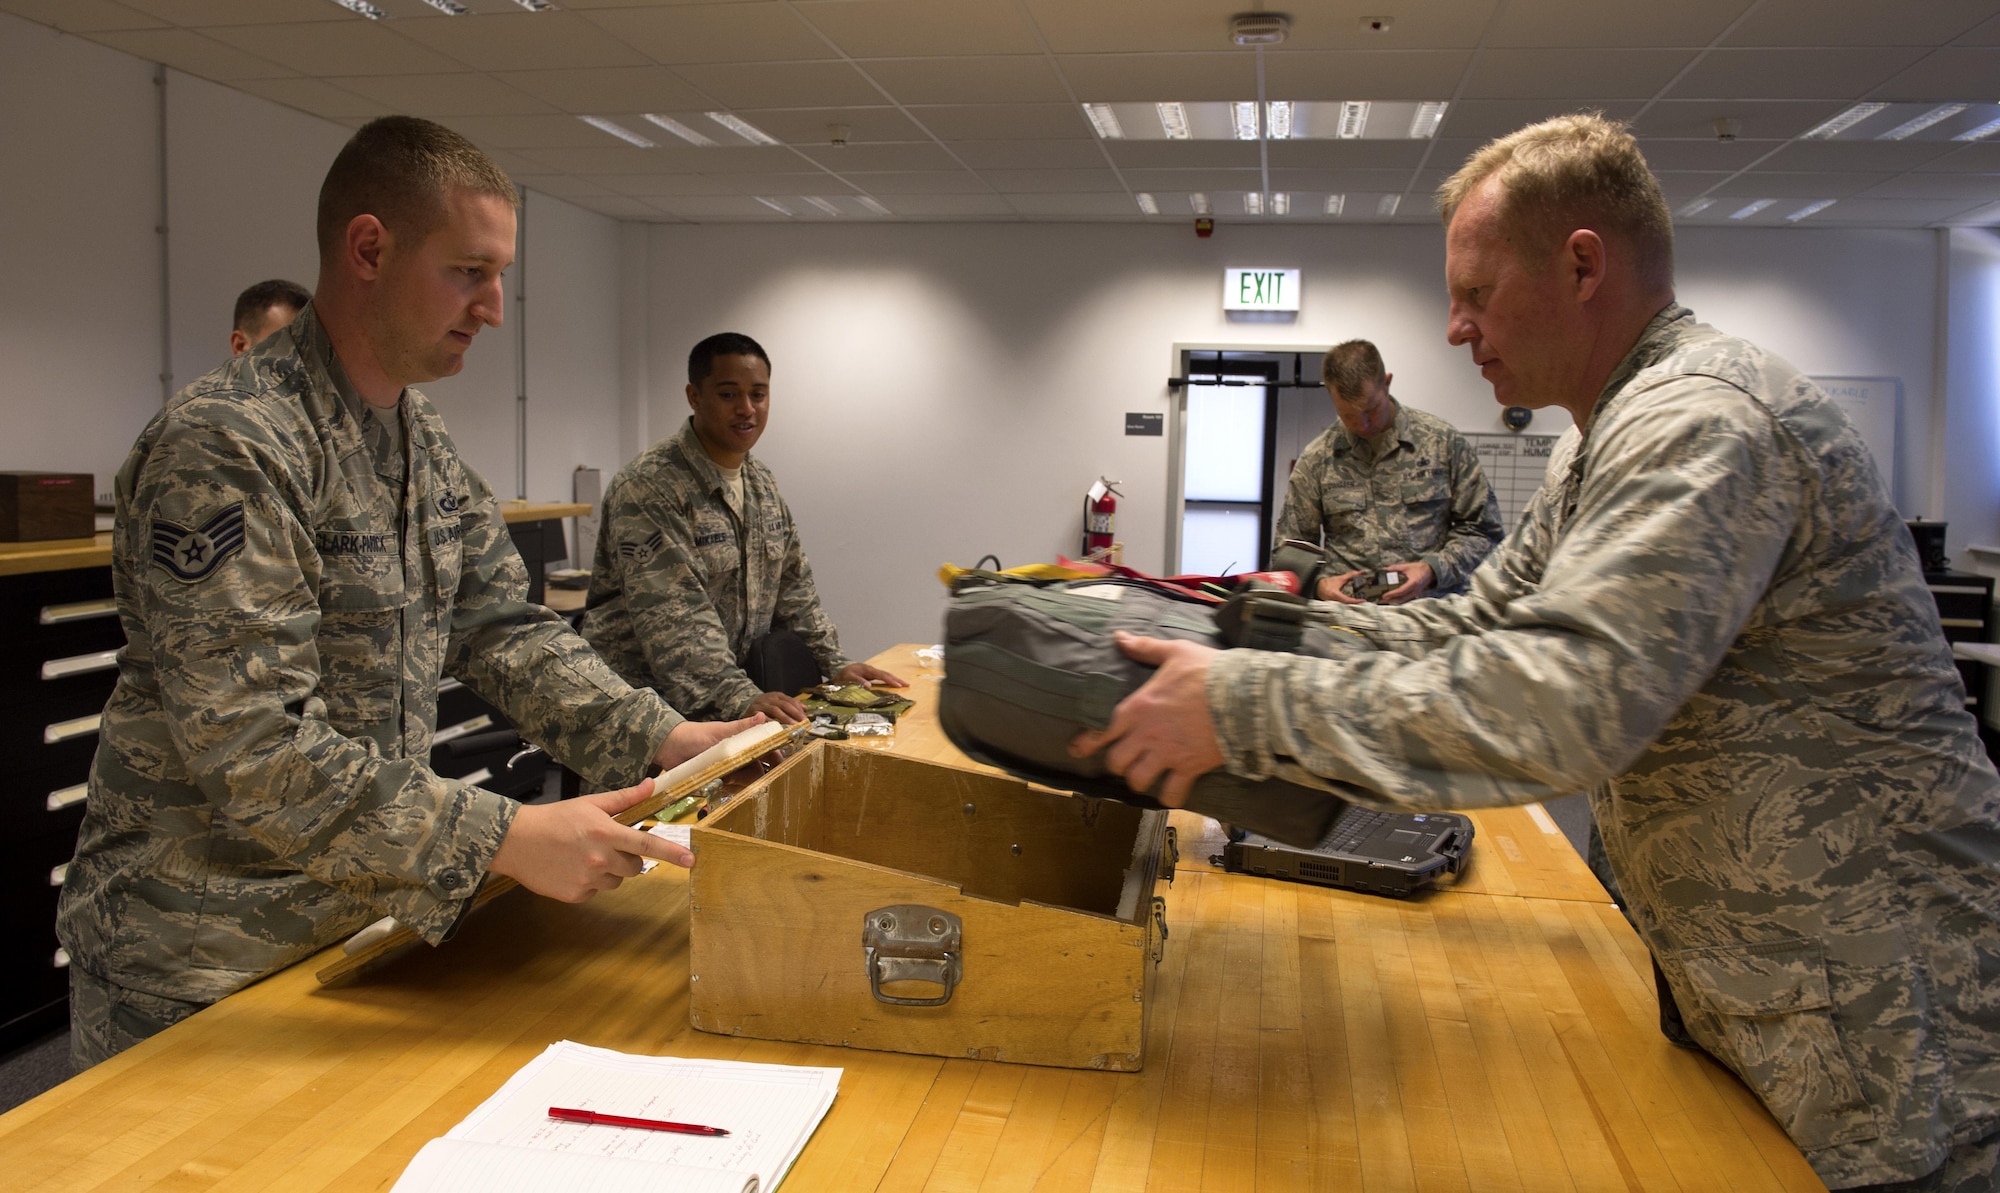 U.S. Air Force Staff Sgt. Joshua Clark-Parrick, 52nd Operations Support Squadron NCO in charge of aircrew flight operations main shop, left, helps Col. Joseph McFall, 52nd Fighter Wing commander, right, fit a survival bag into a F-16 Fighting Falcon simulated seat compartment during a Saber leadership “out and about” event at the parachute shop on Spangdahlem Air Base, Germany, Sept. 8, 2016. The event lets the 52nd FW commander and command chief get a hands on experience at Saber work centers in an effort to better understand the duties of Airmen at Spangdahlem. (U.S. Air Force photo by Airman 1st Class Preston Cherry/Released)